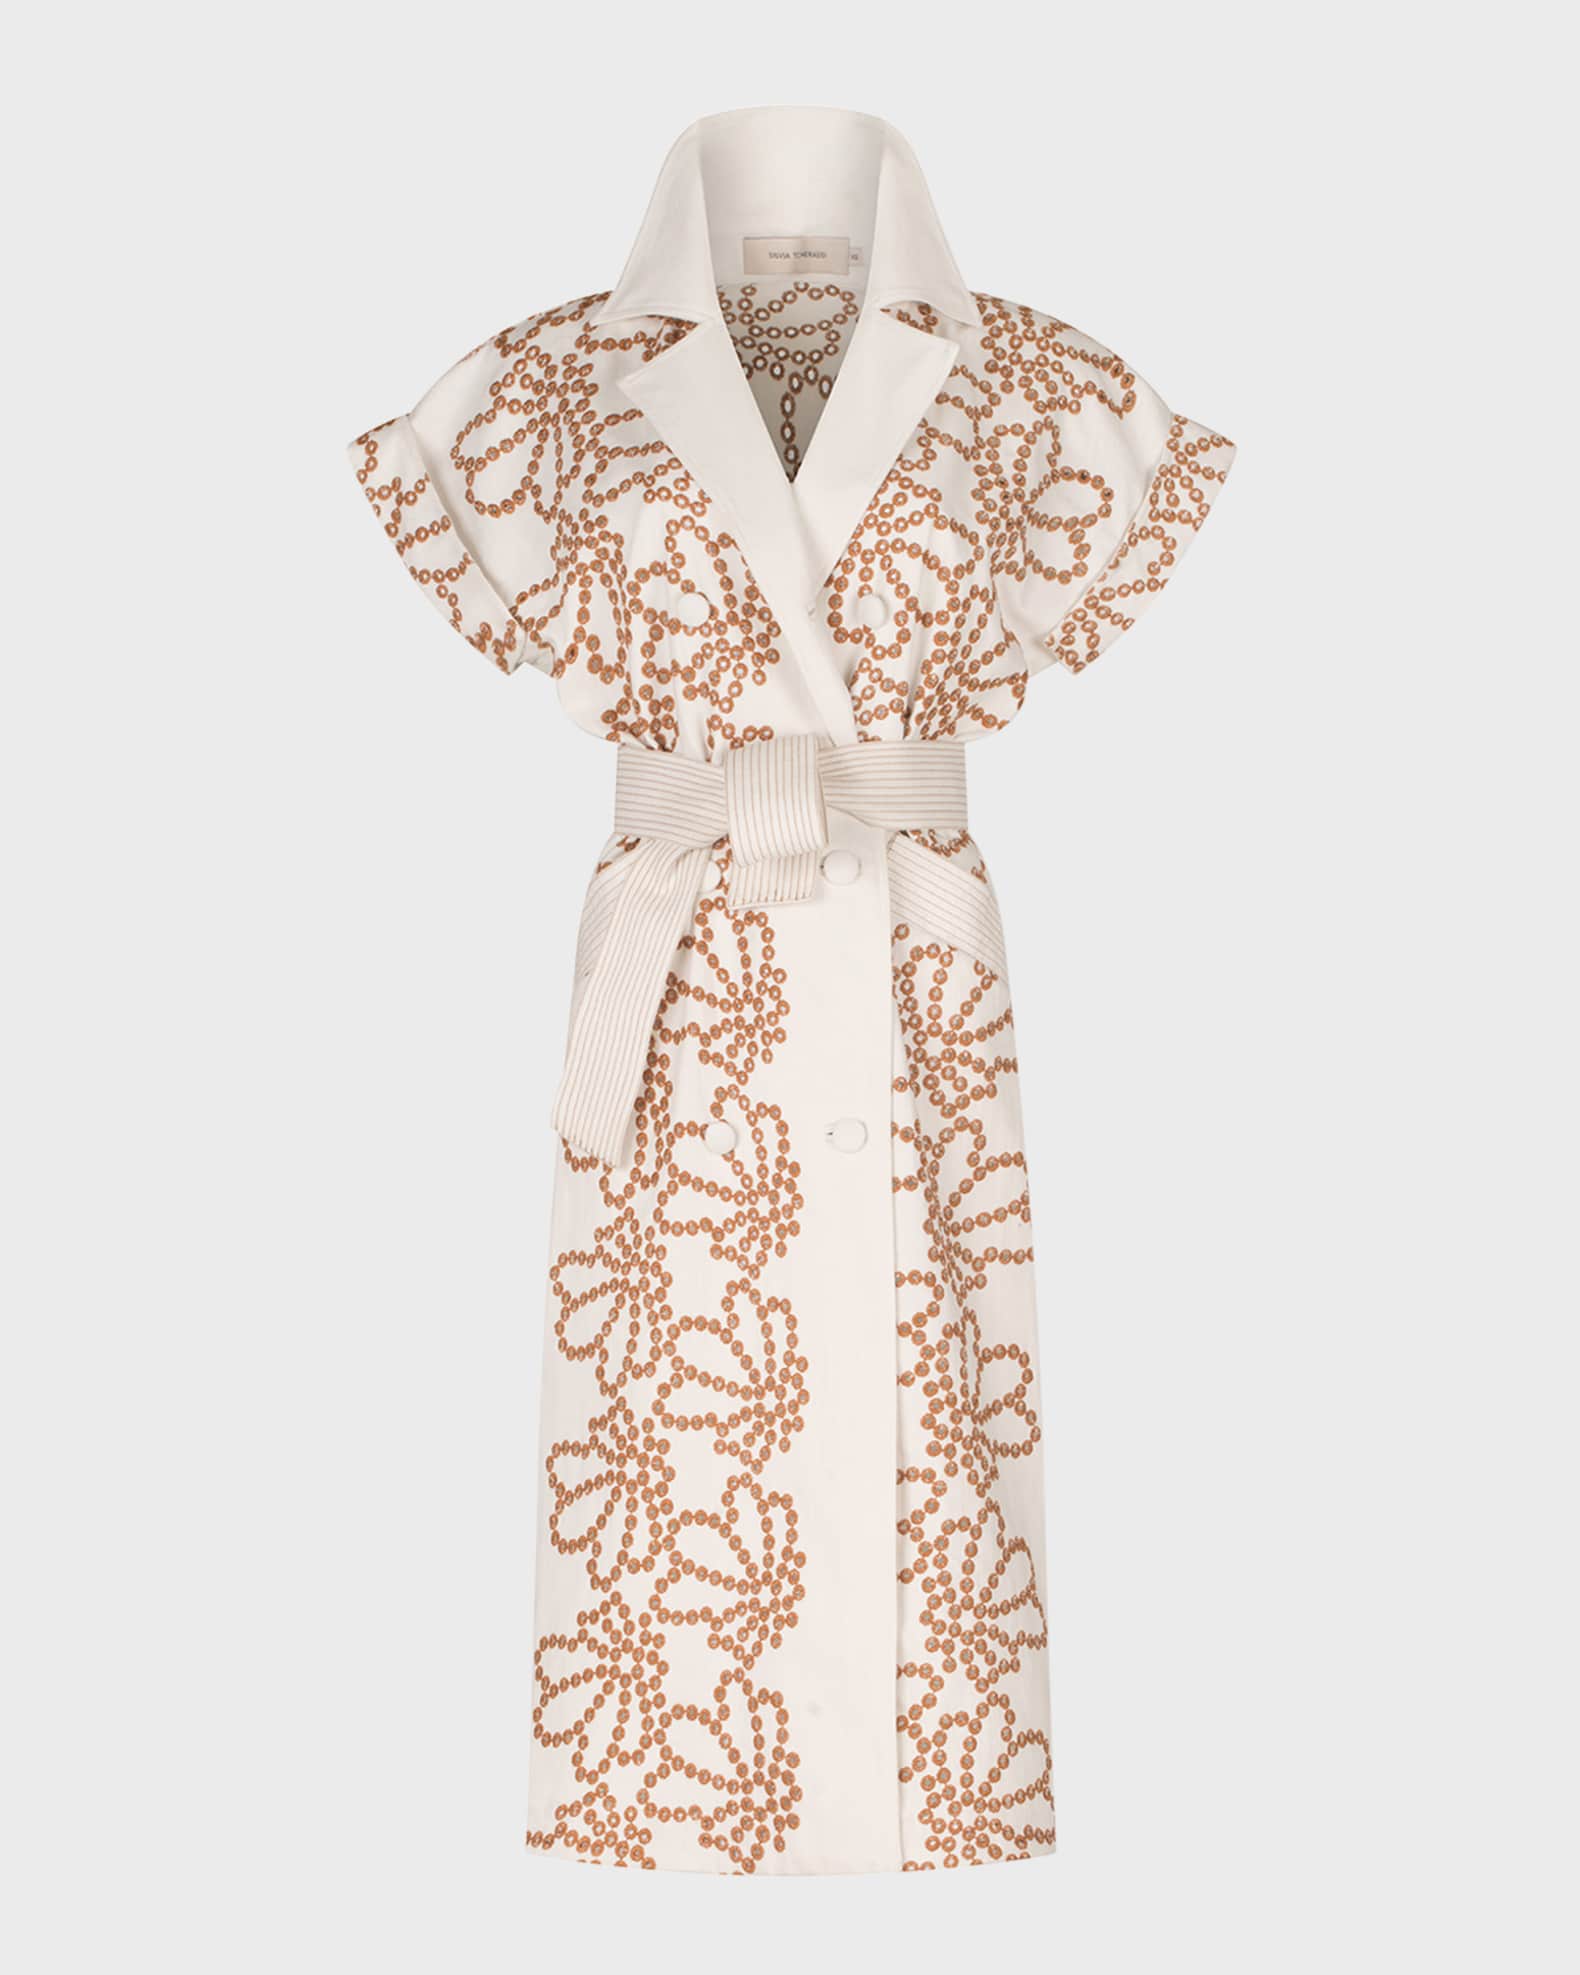 Concetta Embroidered Shirtdress with Tie Belt | Neiman Marcus